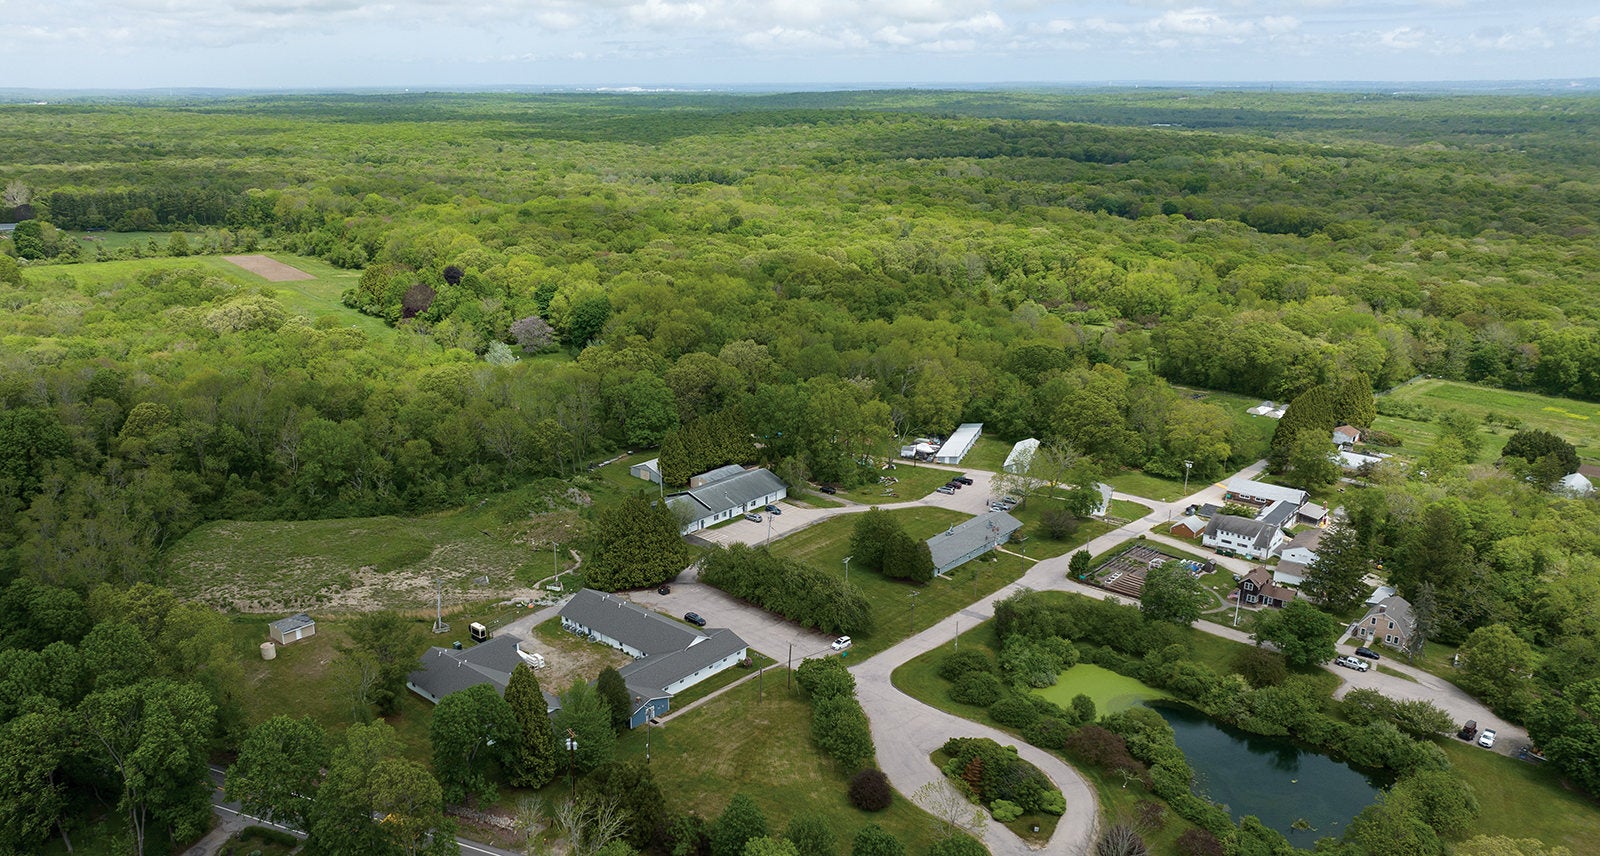 An aerial drone view of the present-day East Farm and buildings